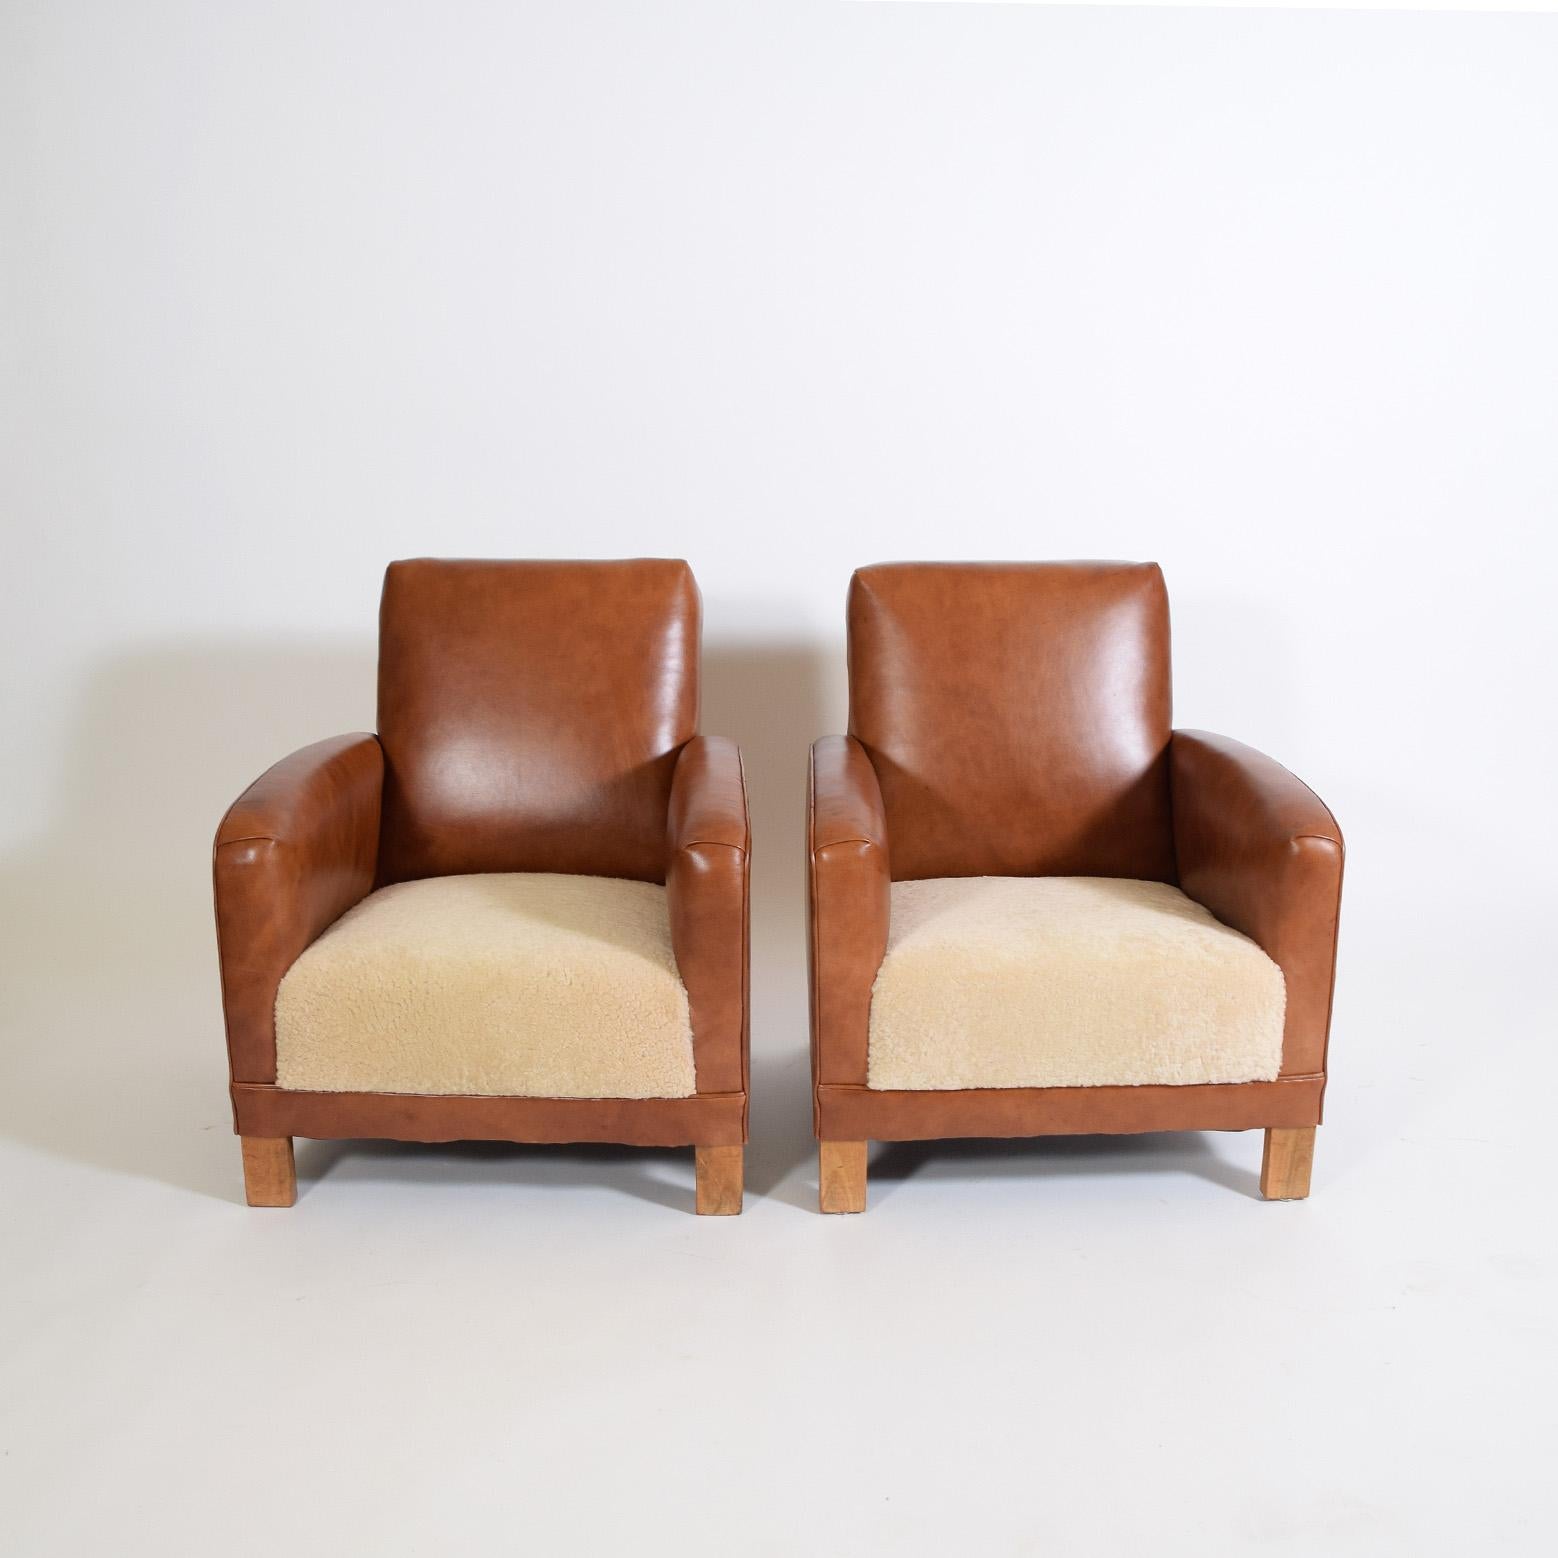 1930's chairs